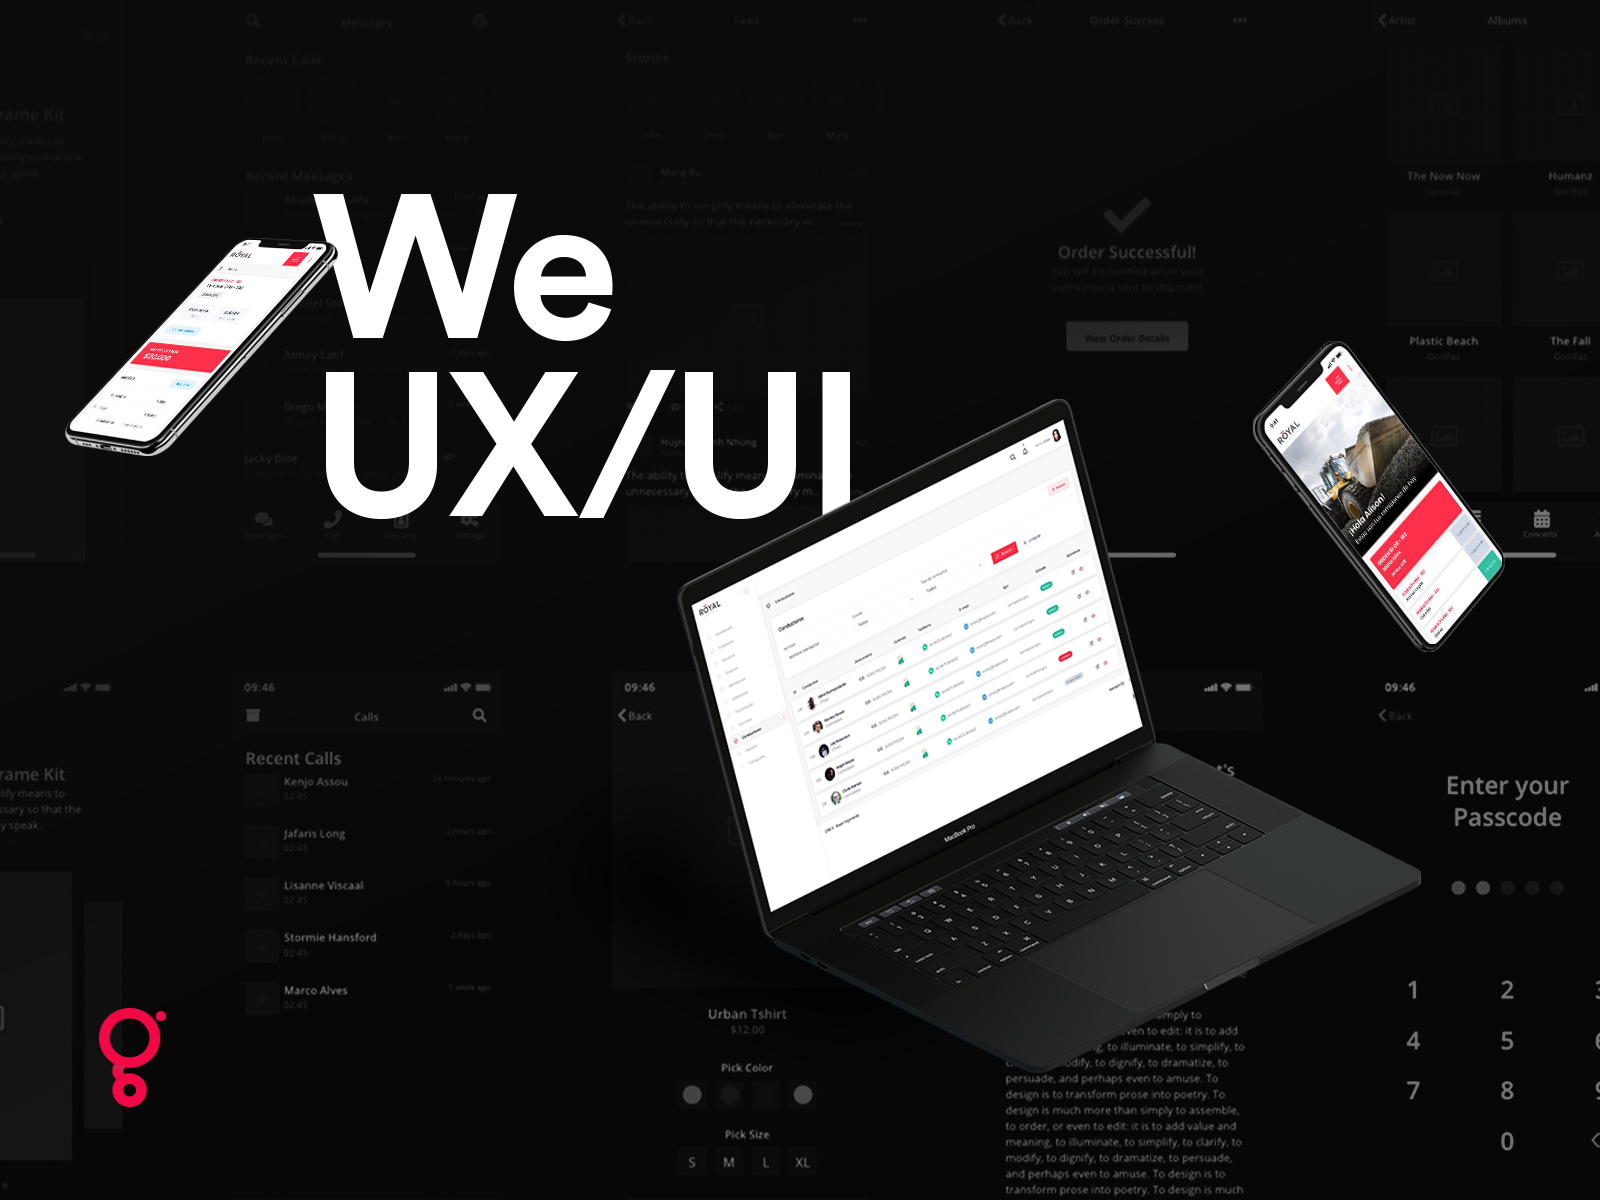 UX UI Graphitech Agency by Graphitech Agency on Dribbble